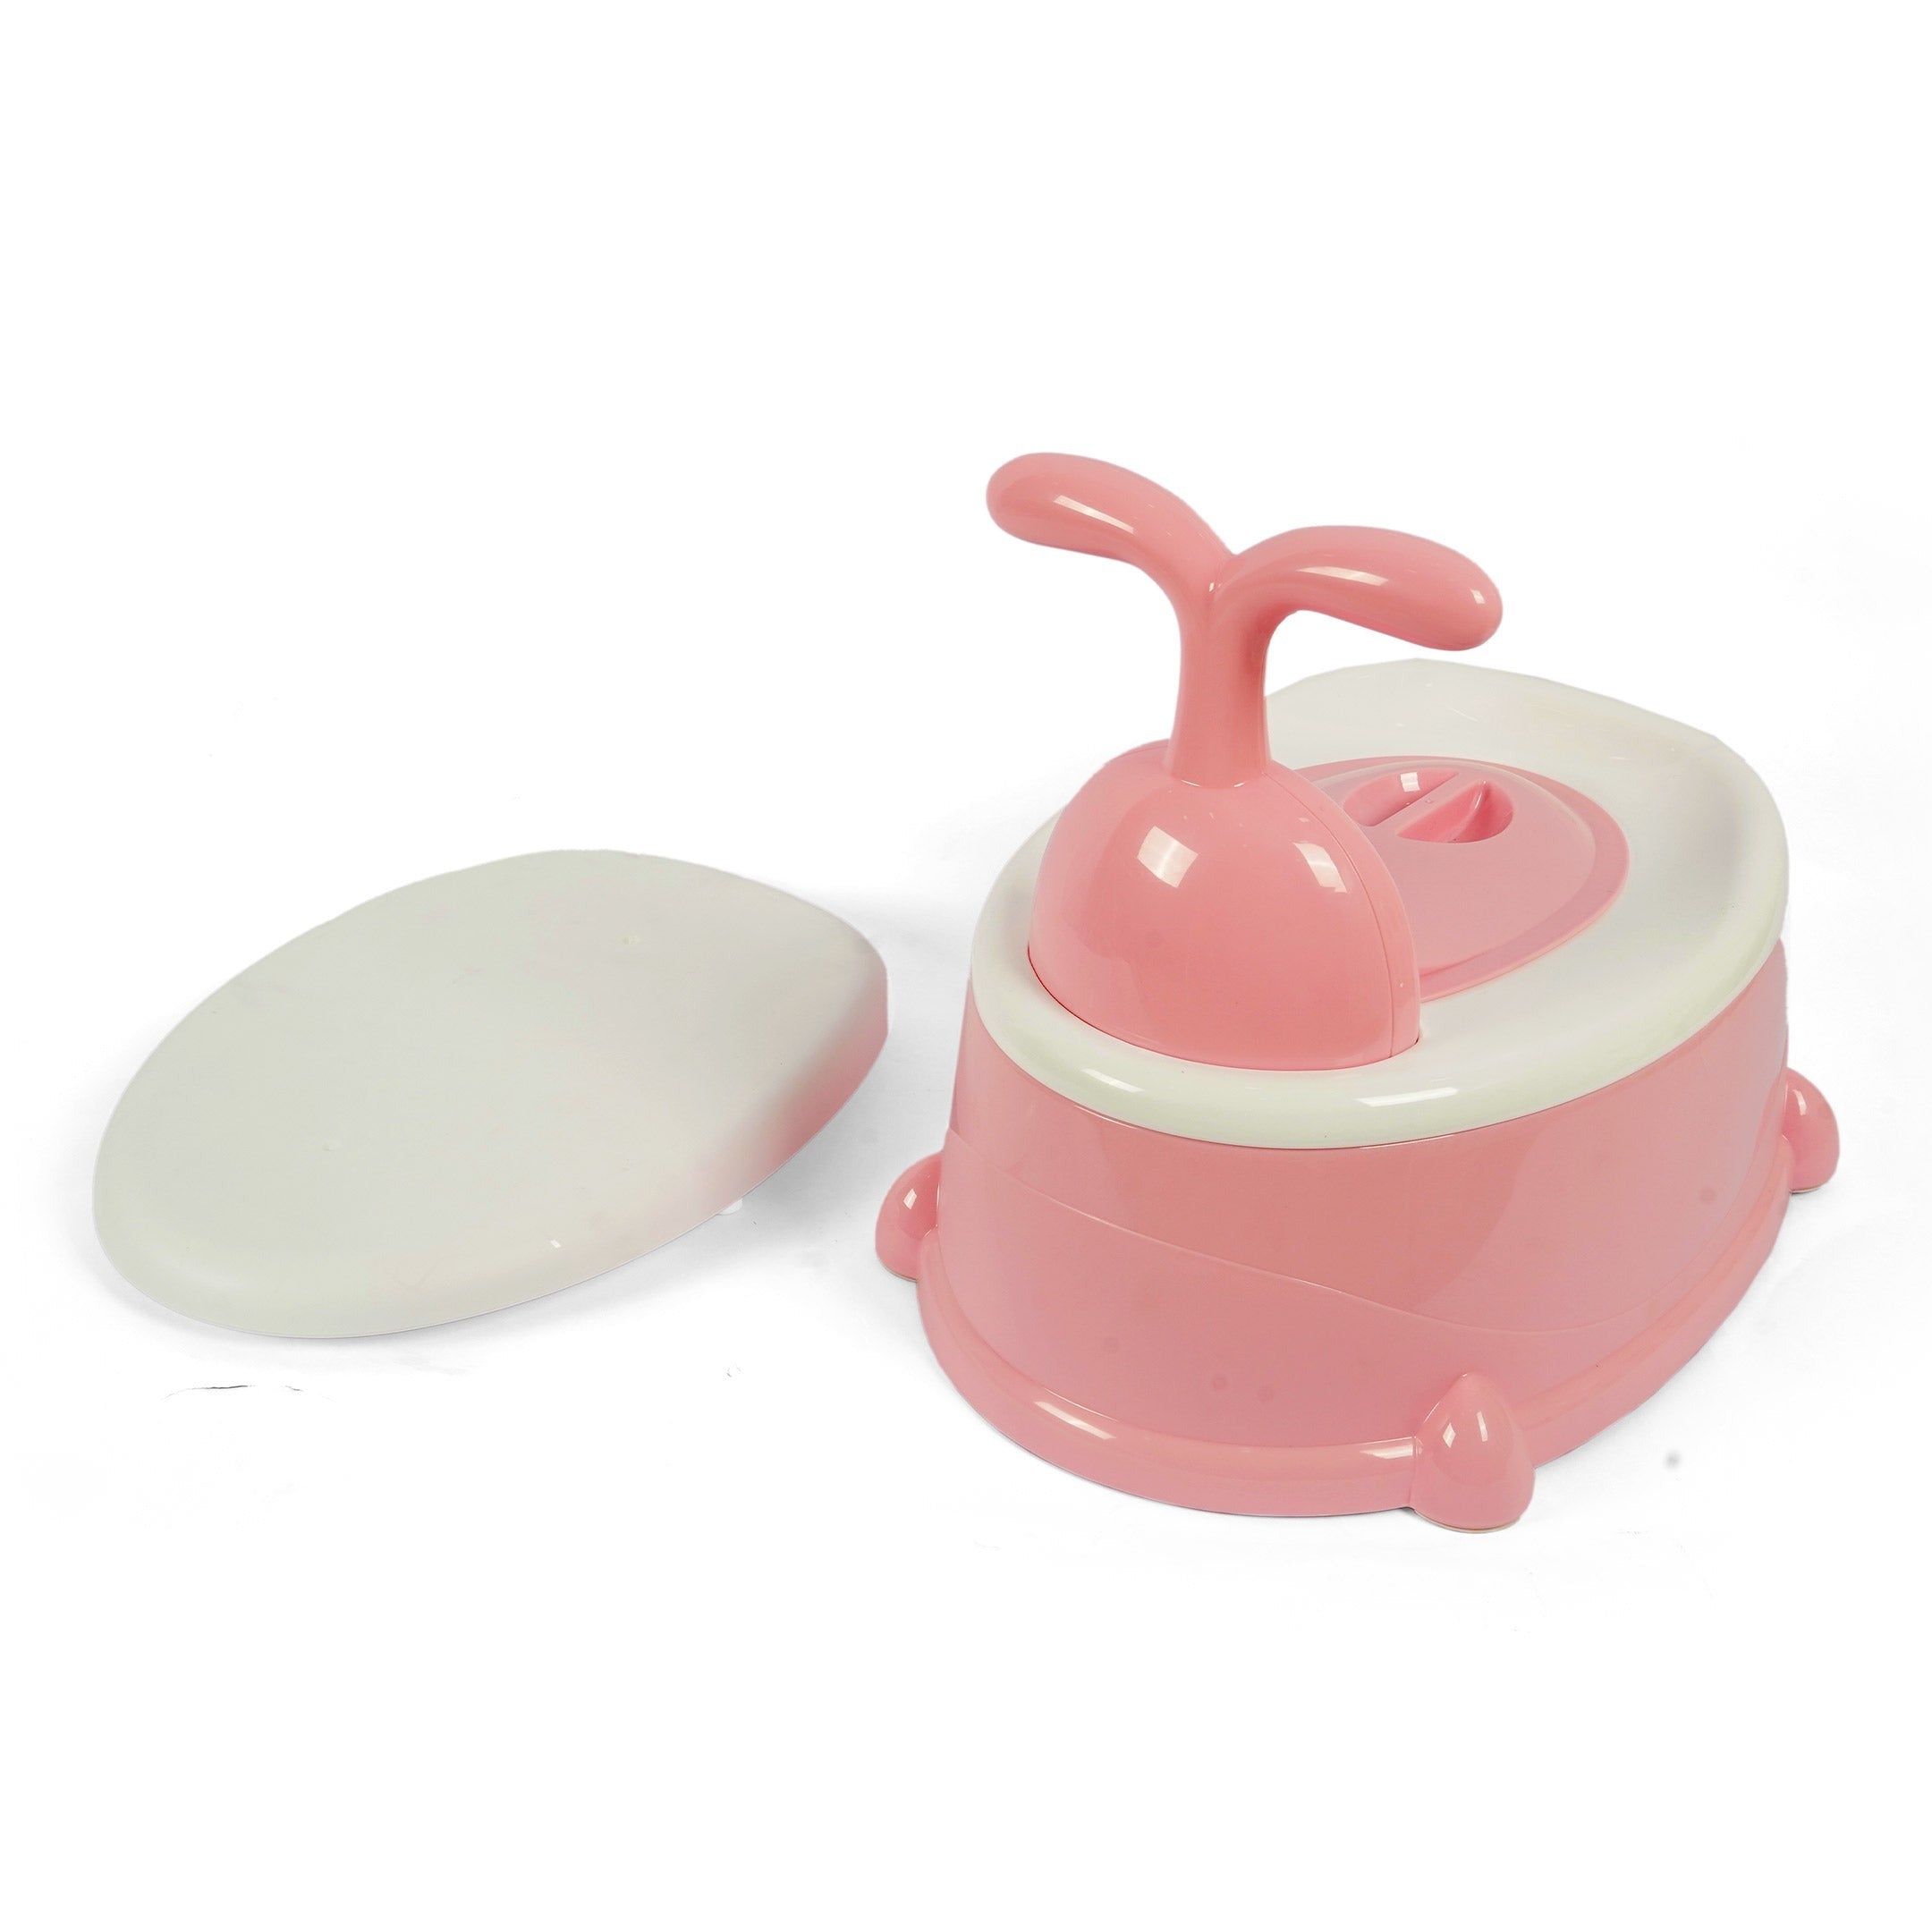 3-in-1 Bunny Potty Seat